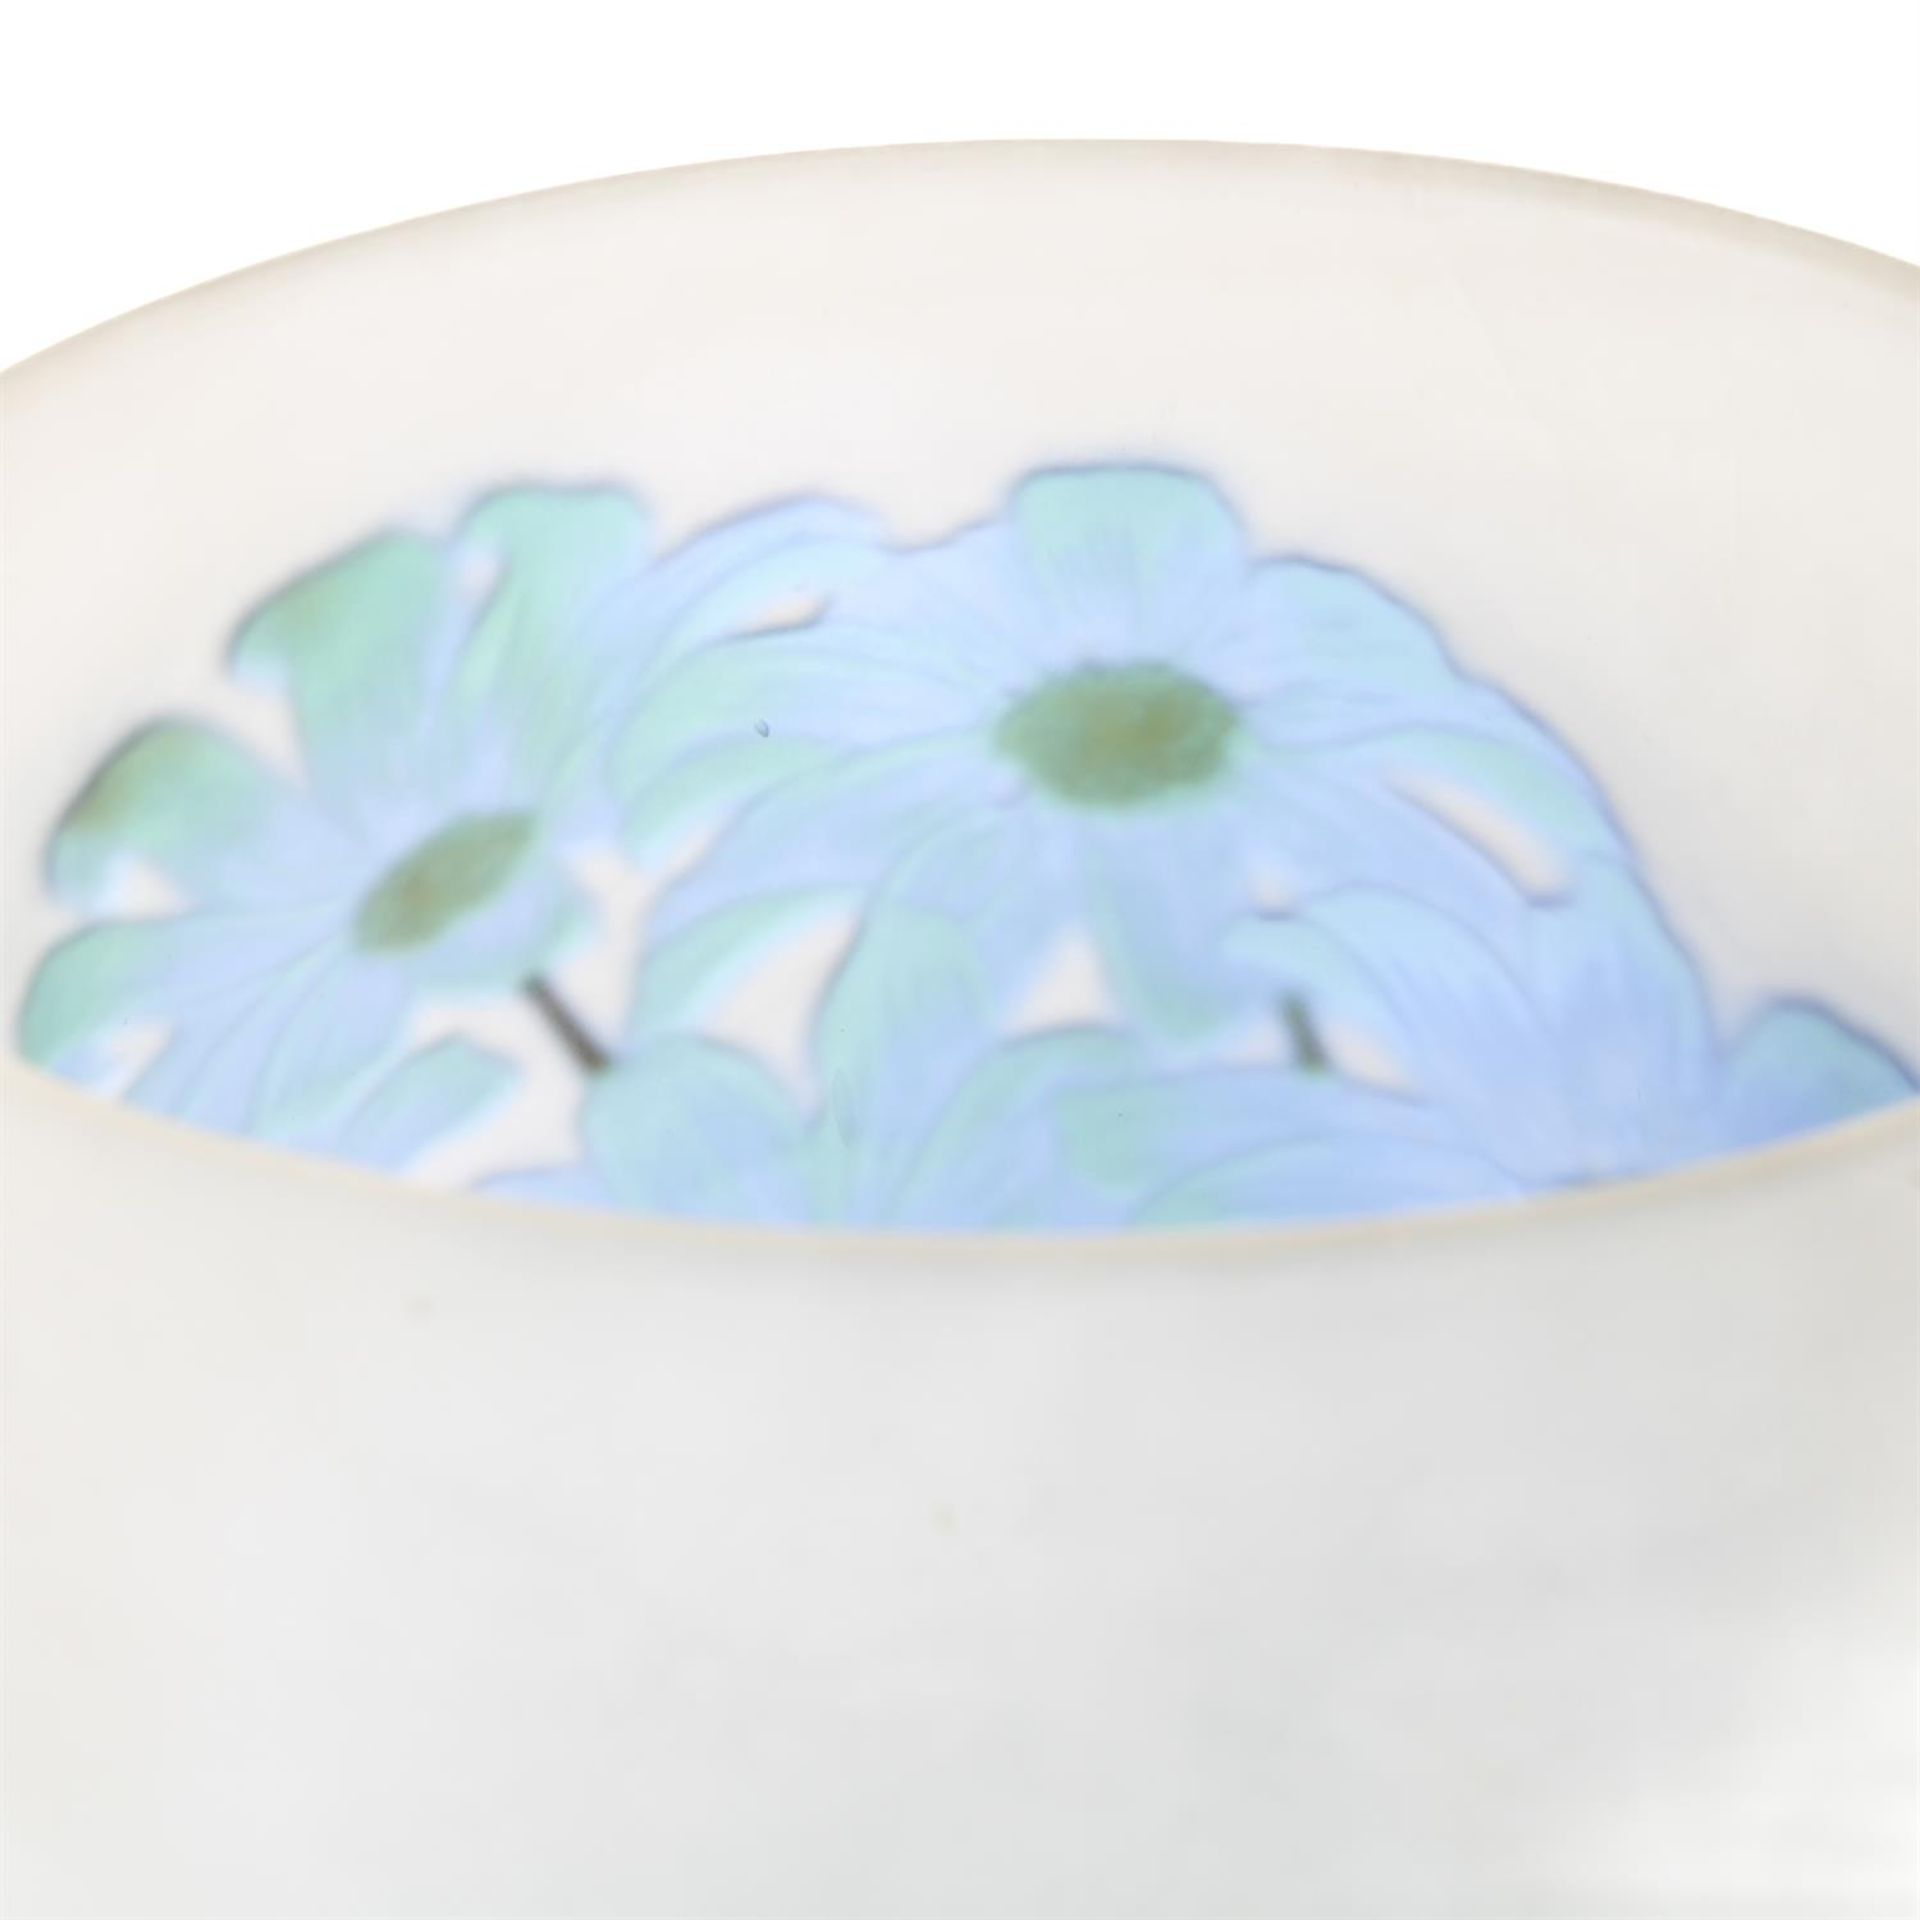 Emile Galle cameo glass vase with daisies - Image 6 of 8